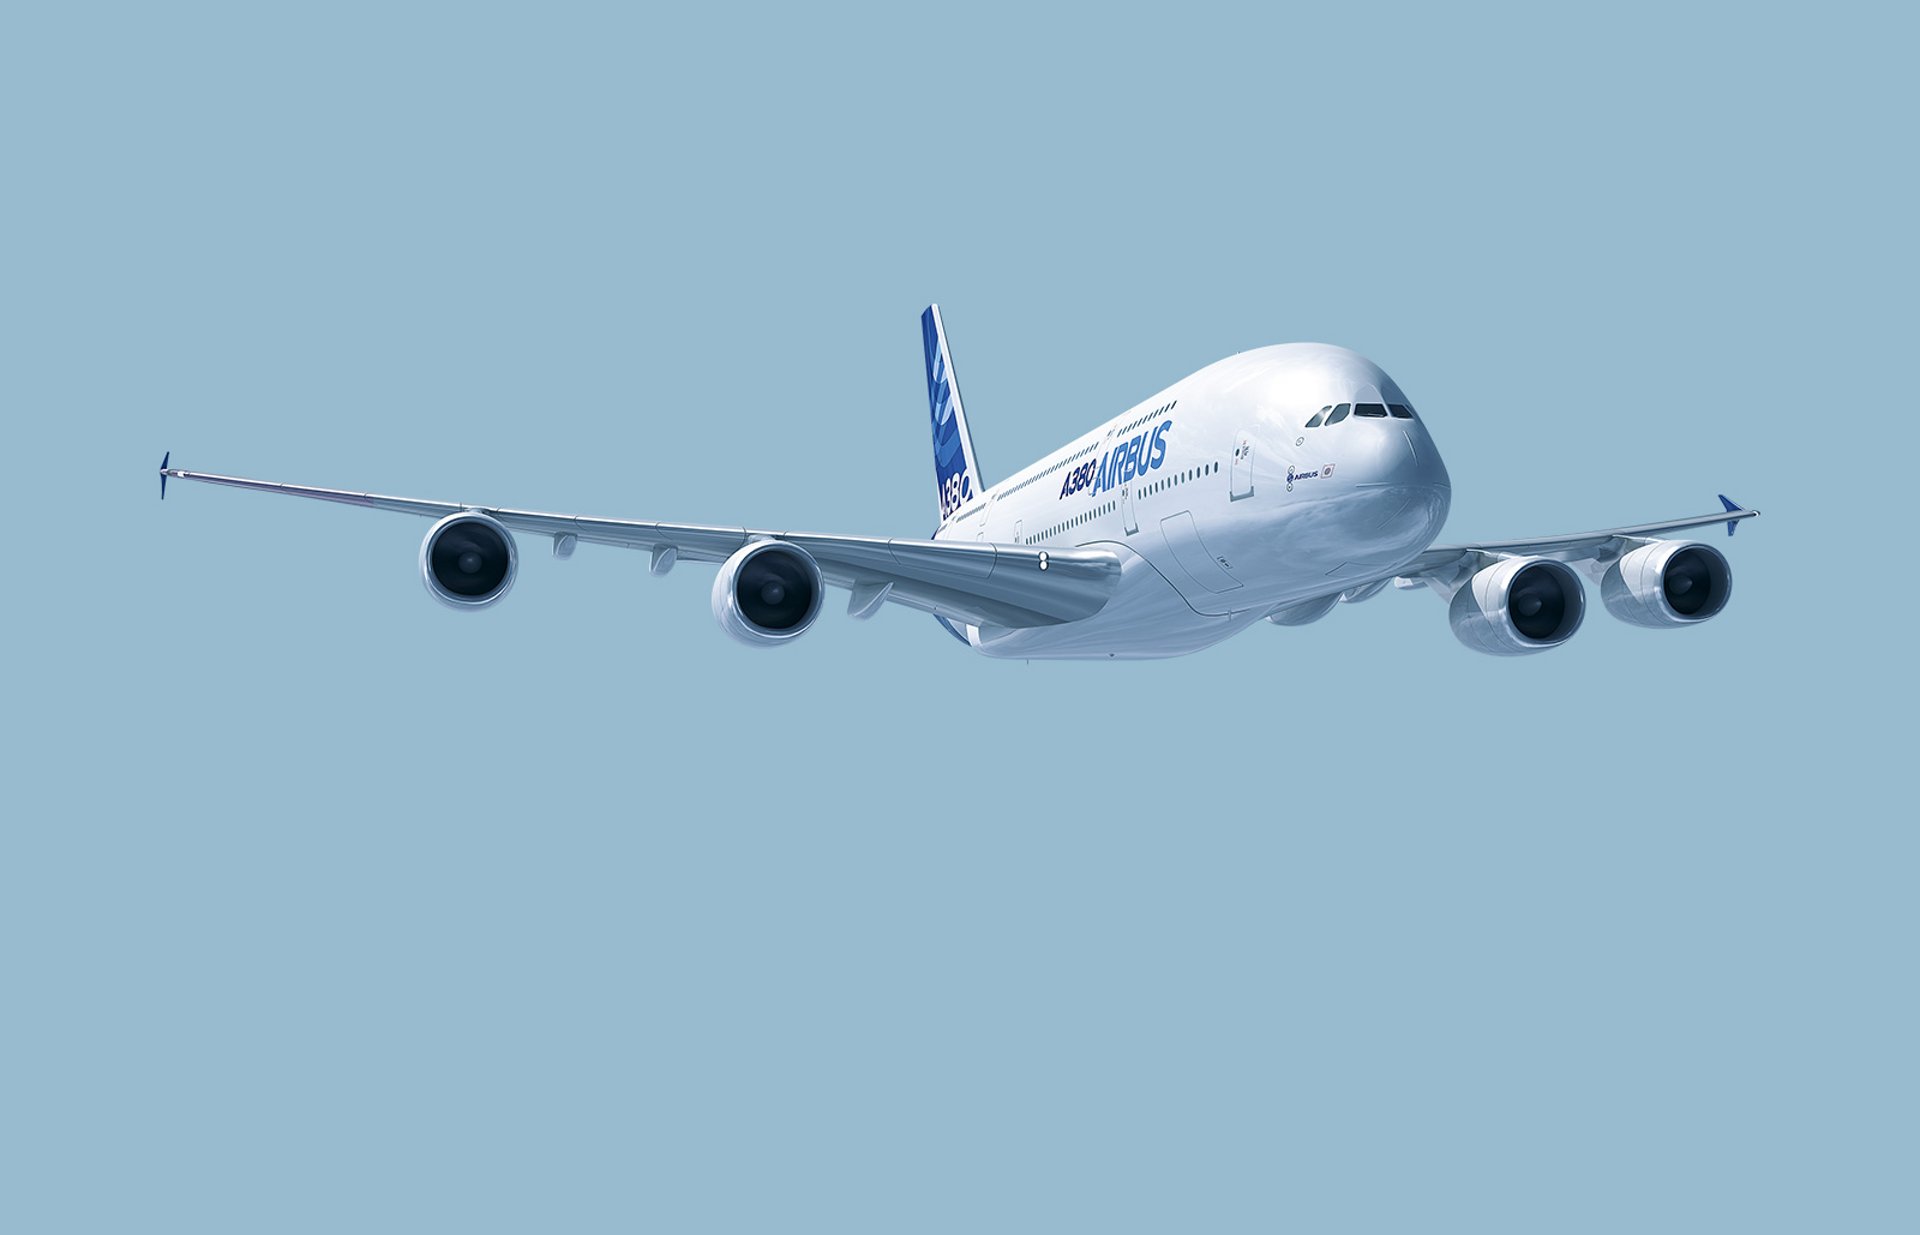 The unlikely test bed for hydrogen-power: the superjumbo A380